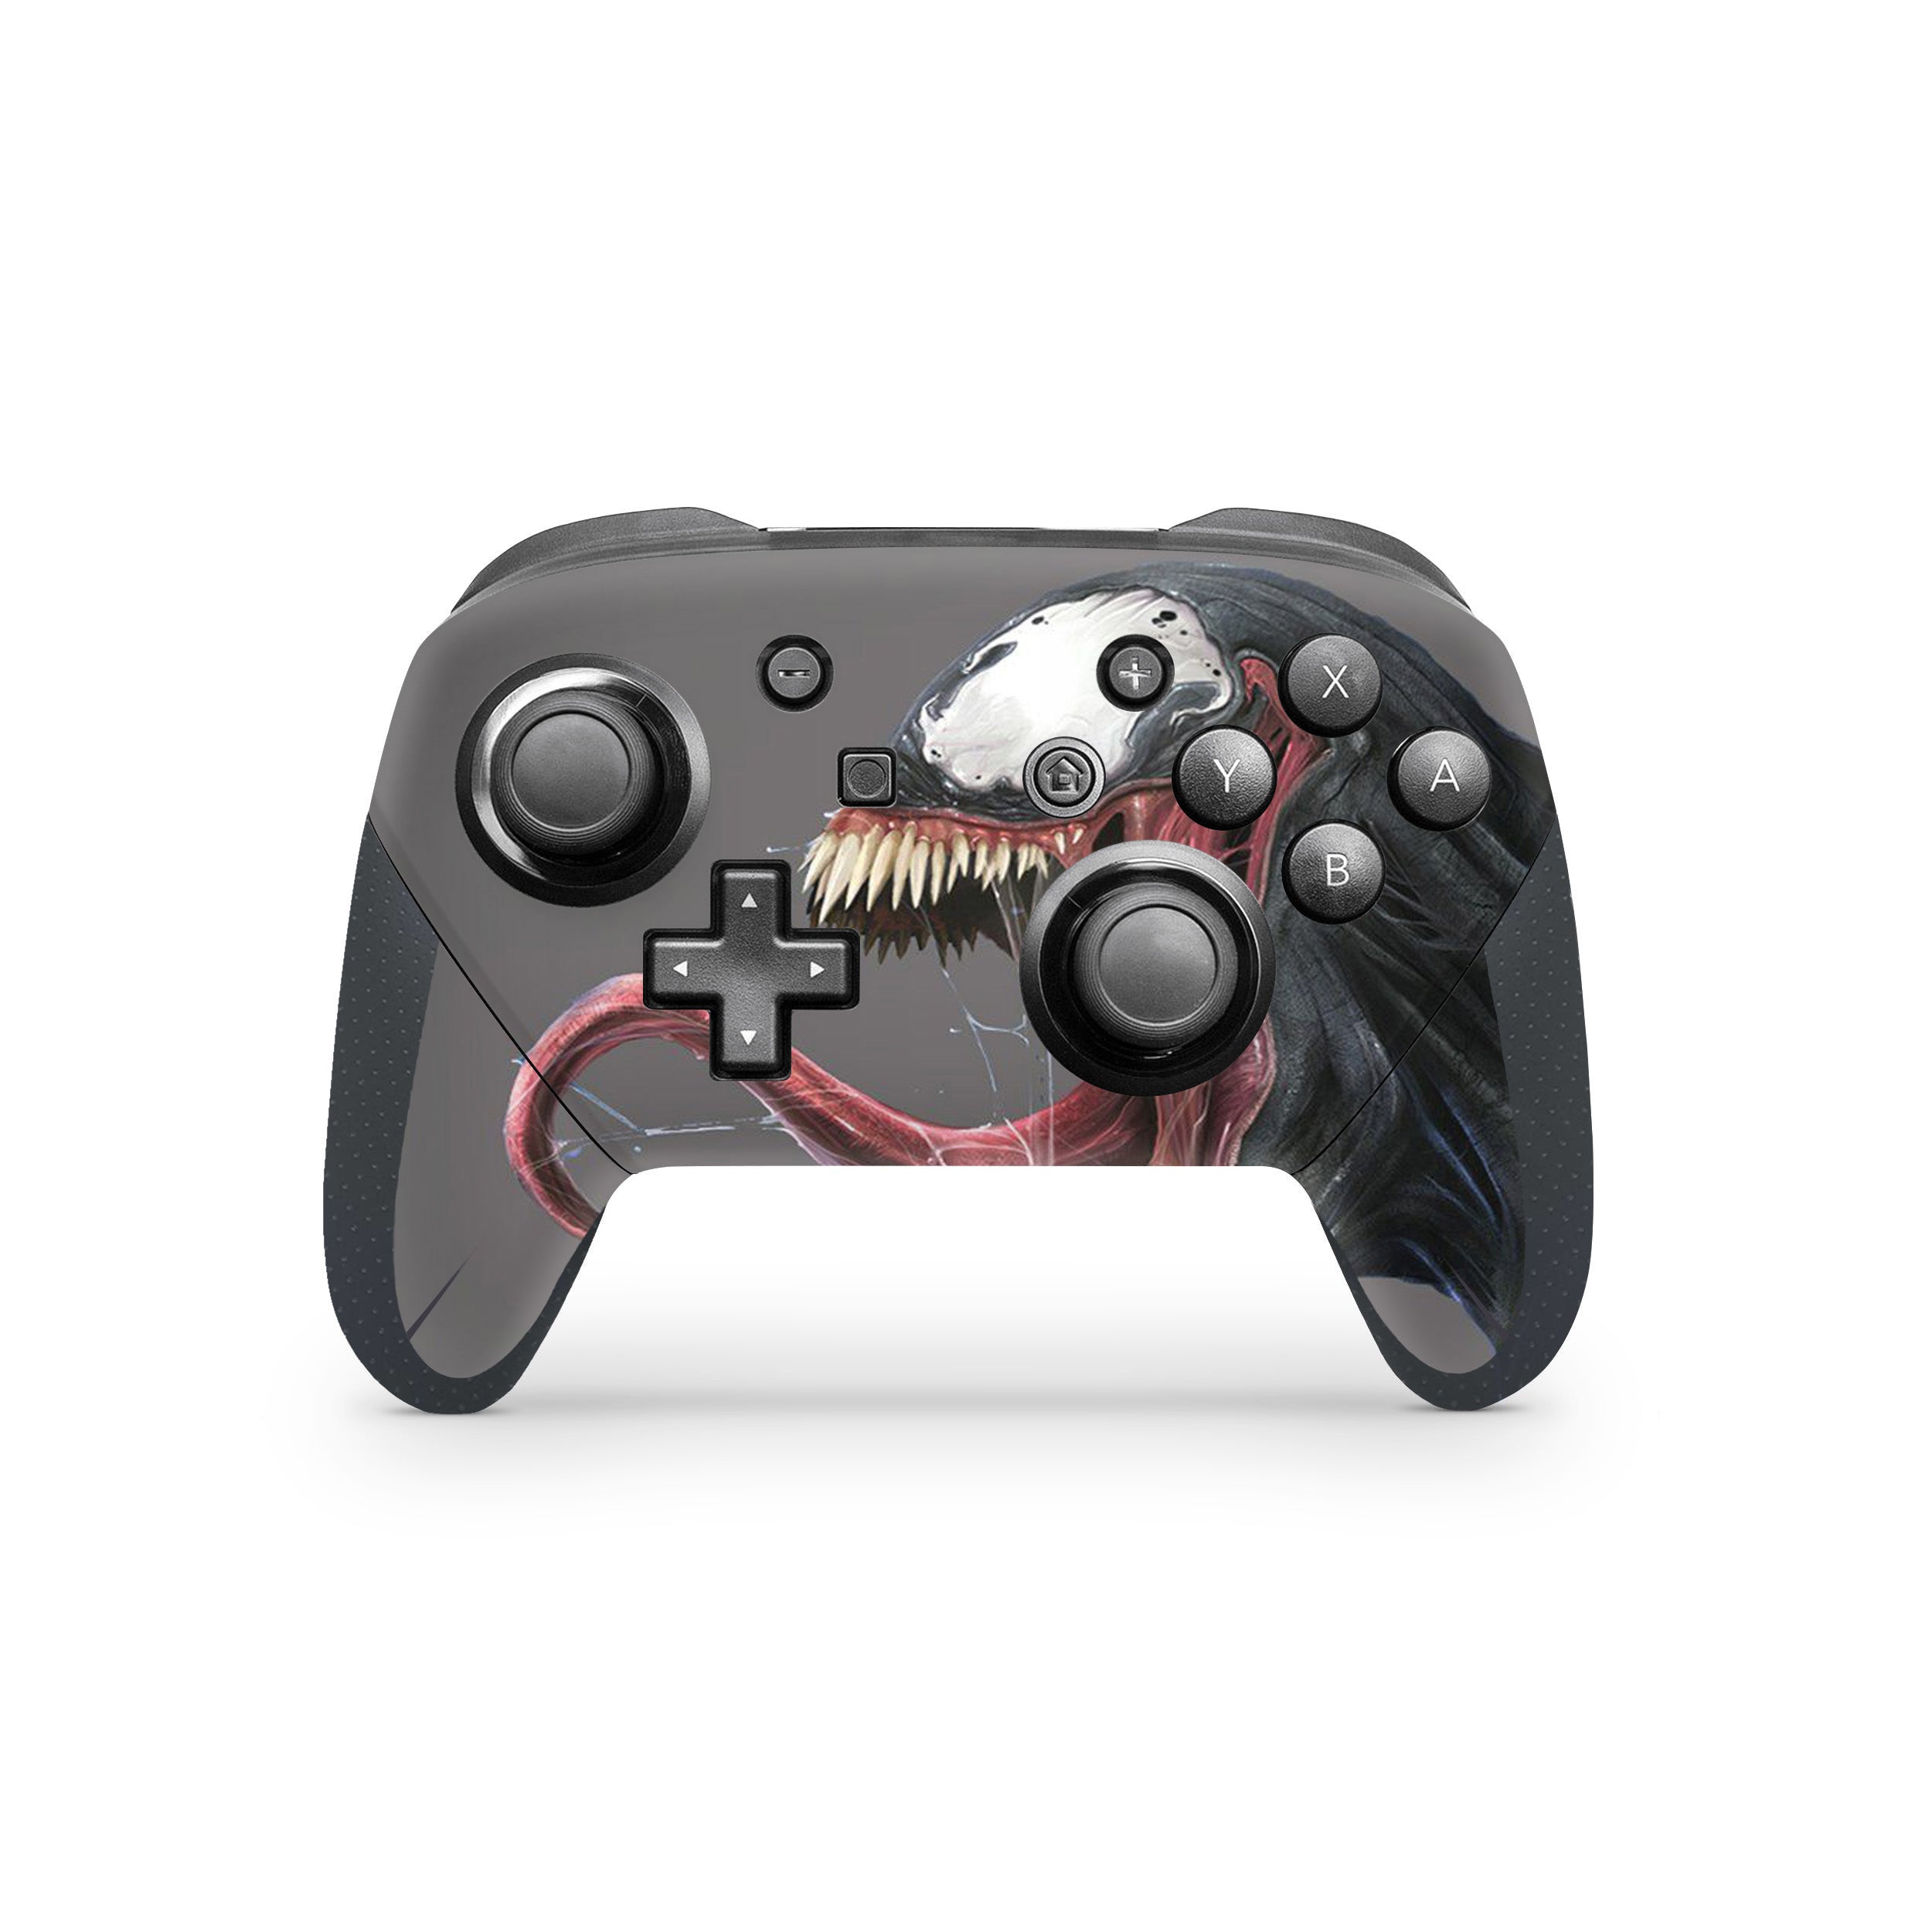 A video game skin featuring a Marvel Venom design for the Switch Pro Controller.